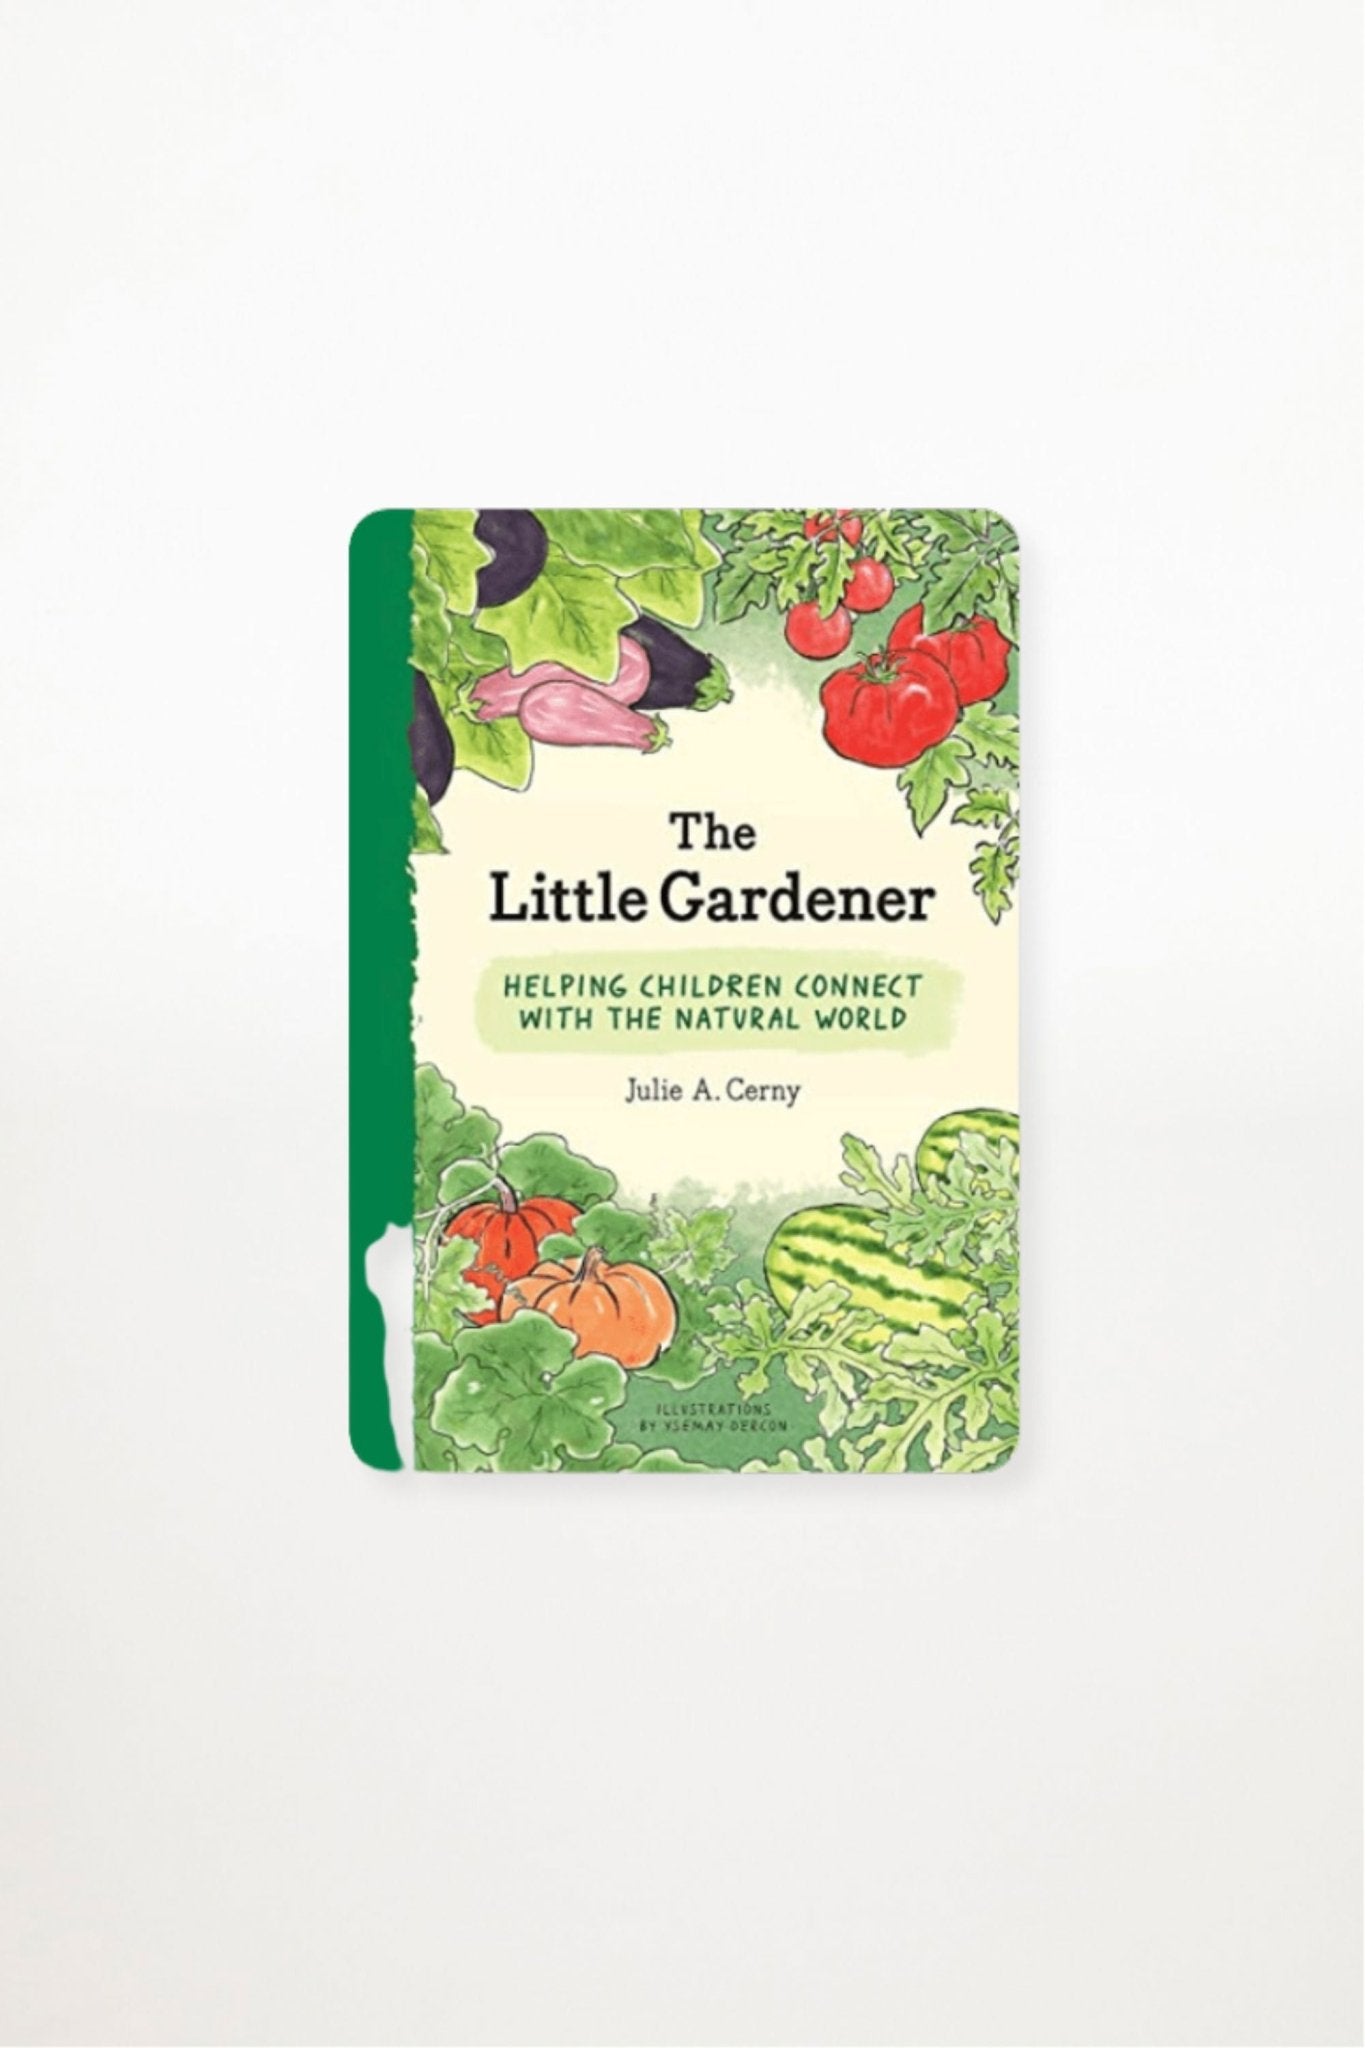 Little Gardener - Helping Children connect with the natural world - Ensemble Studios